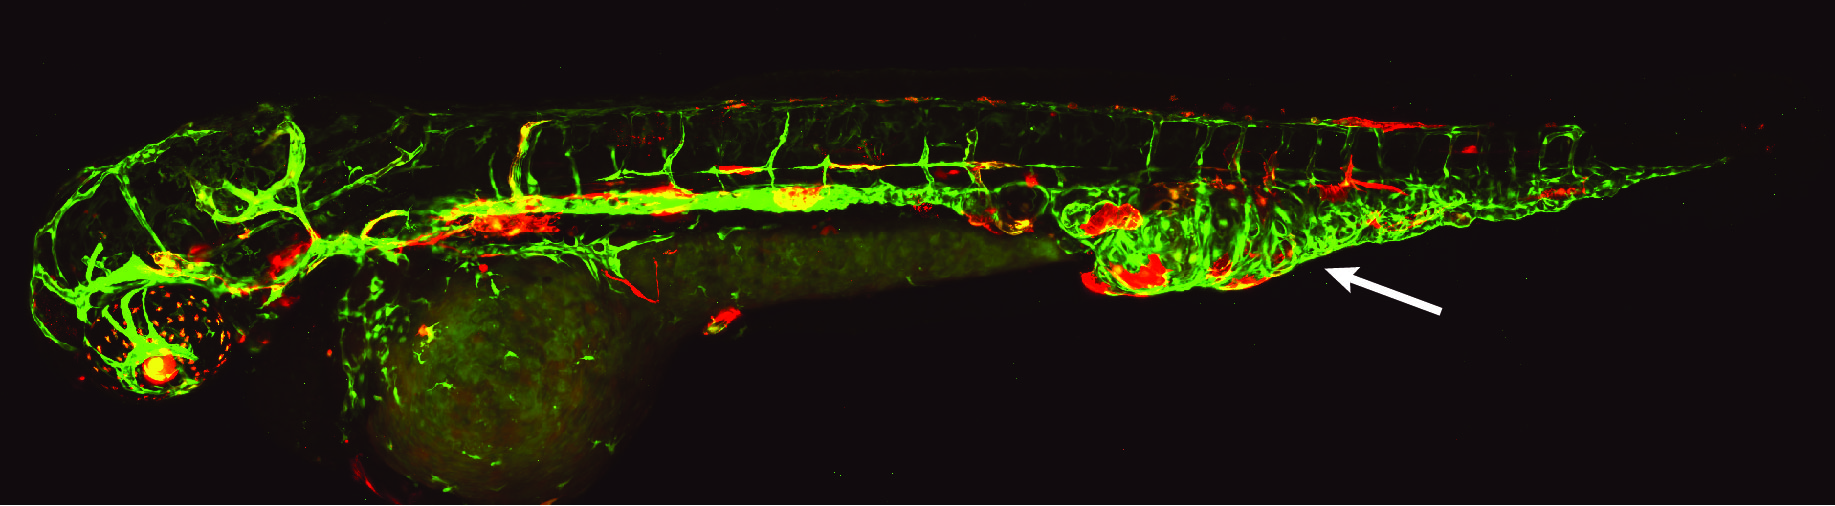 Zebrafish with fluorescently labeled lymphatic and blood vessels and vascular malformation in the tail.